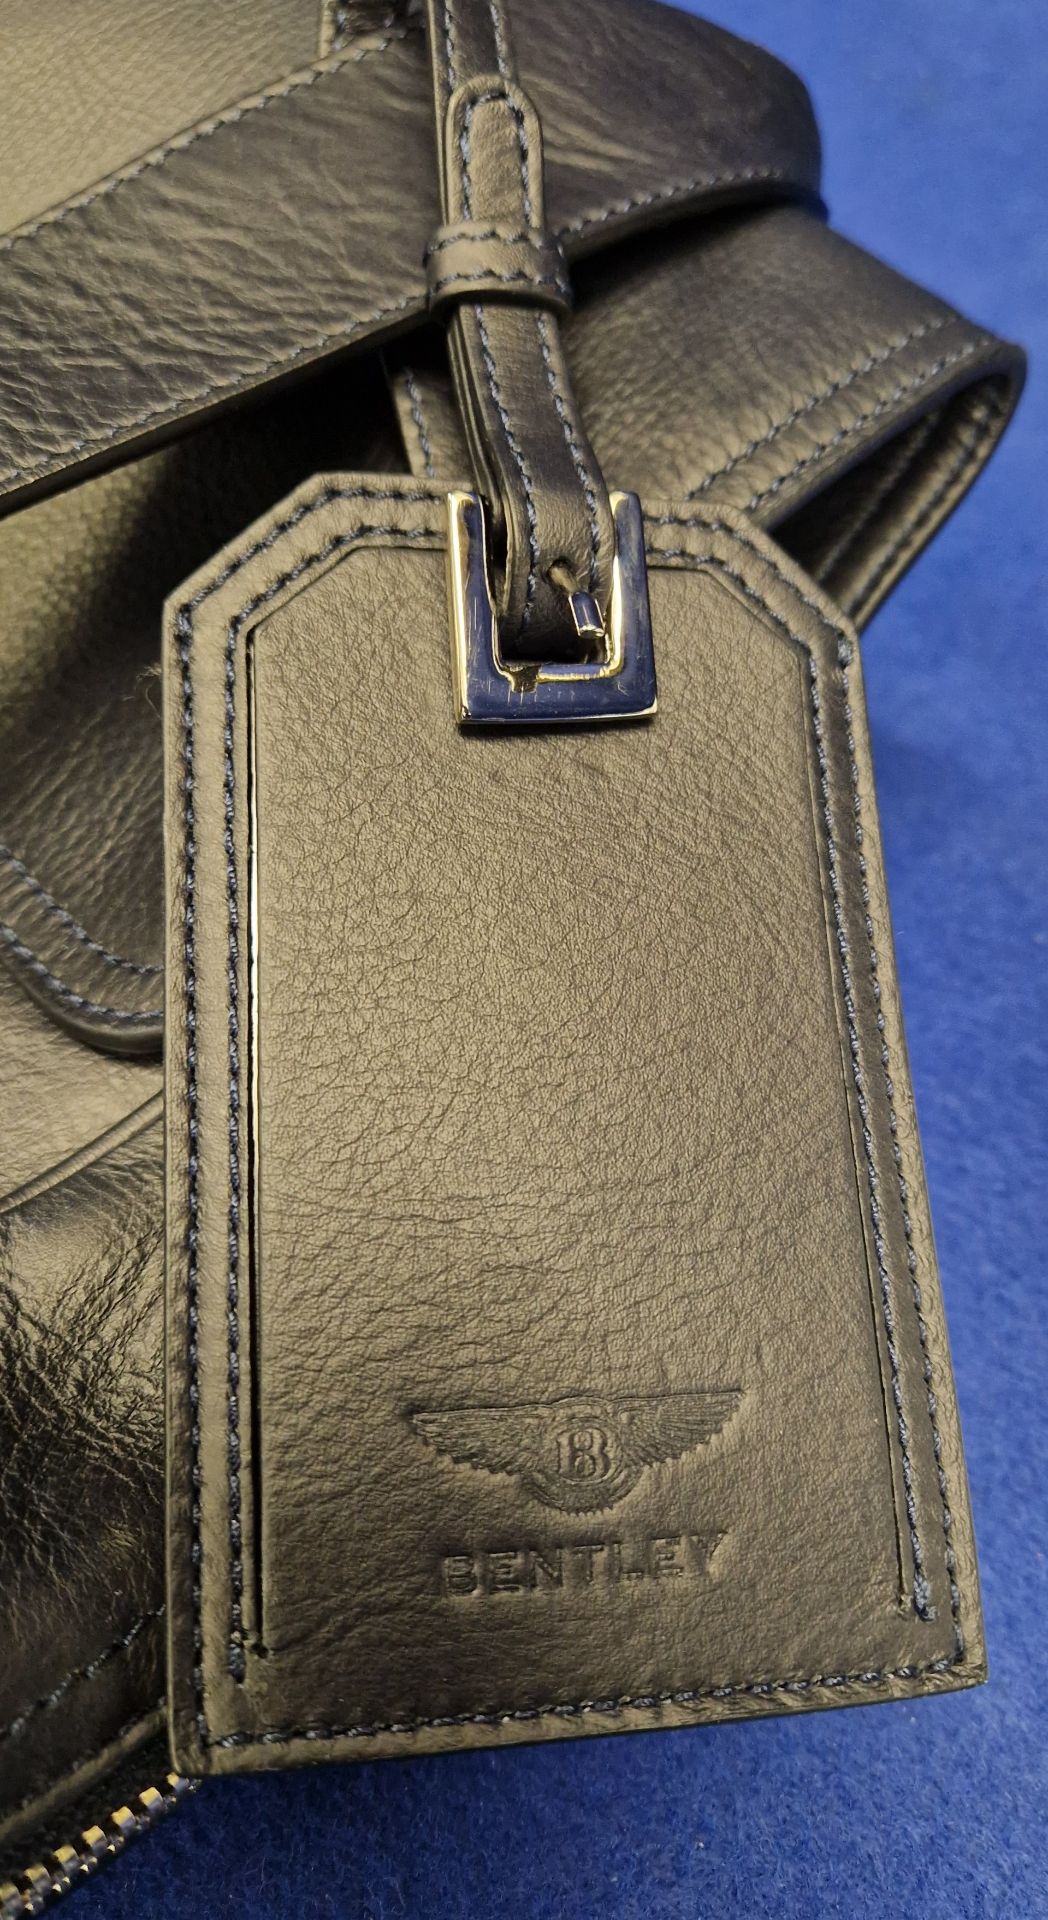 A BENTLEY Heritage Backpack in 100 per cent Sapphire Coloured Leather with Embossed Bentley - Image 3 of 3